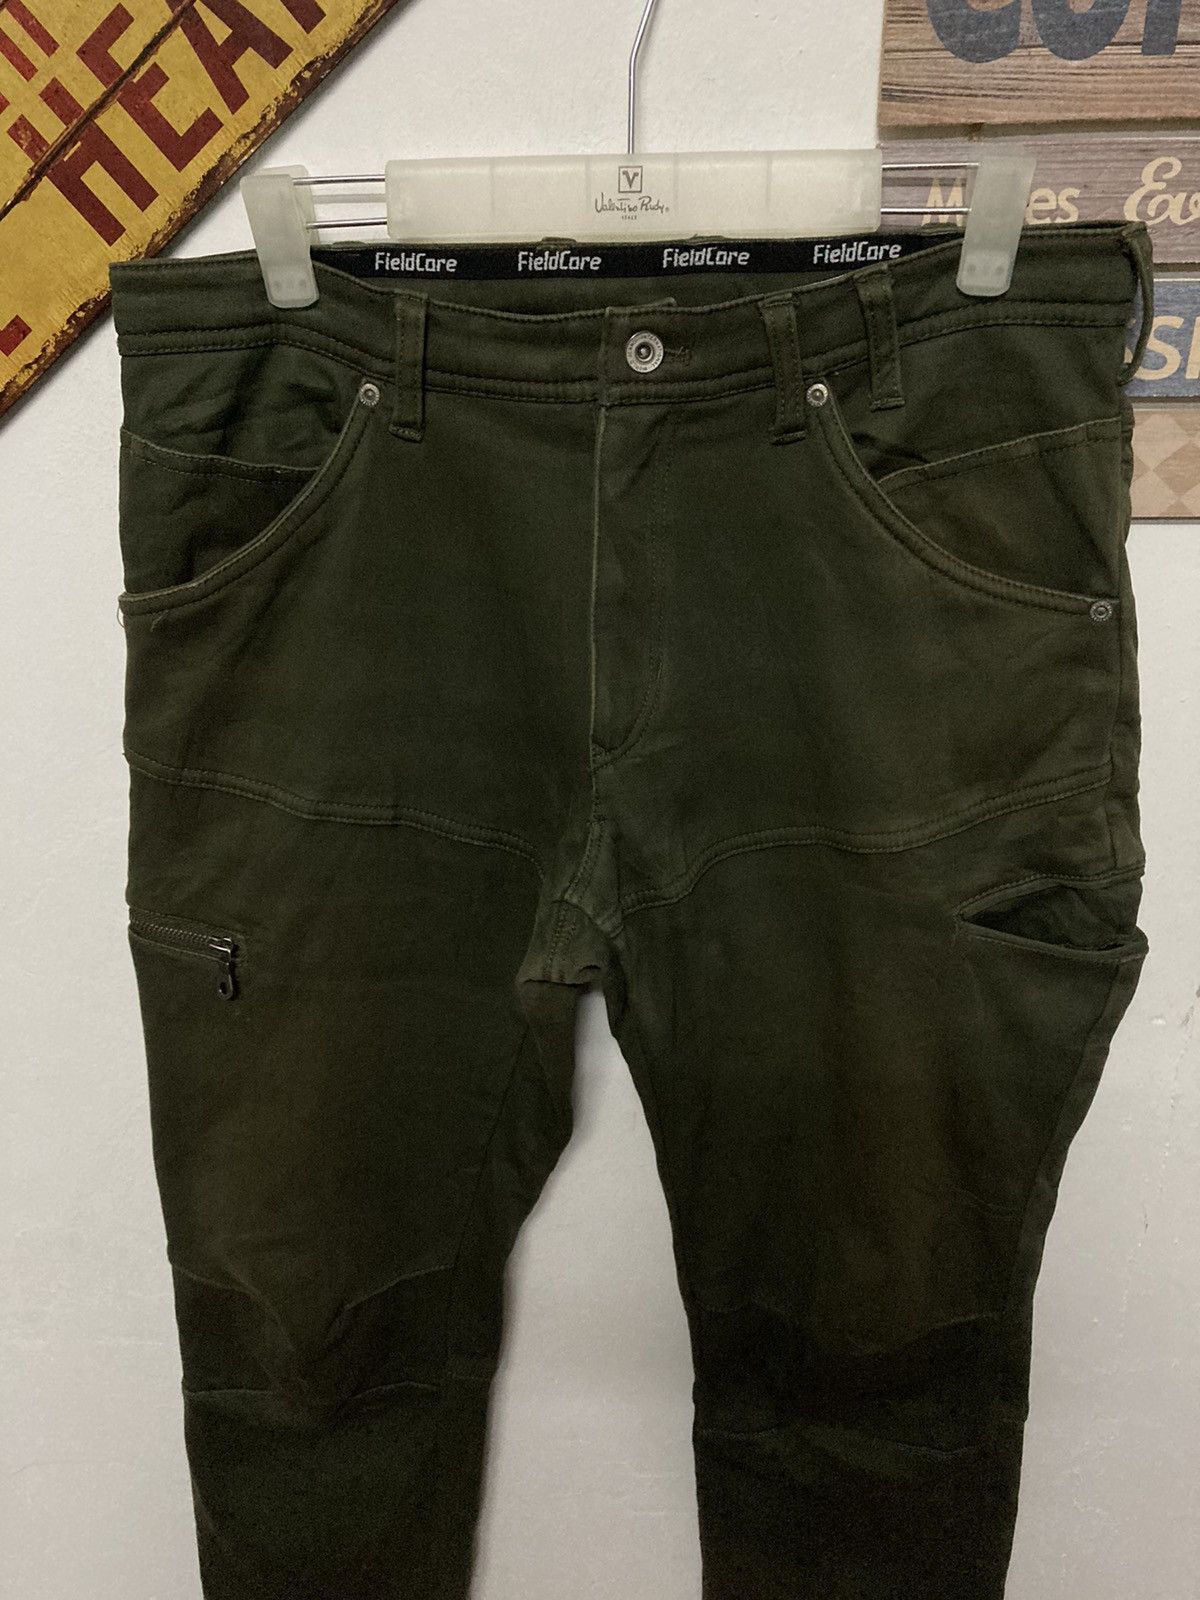 Vintage - Fieldcore Tactical Outdoor Thermal Pants - 4